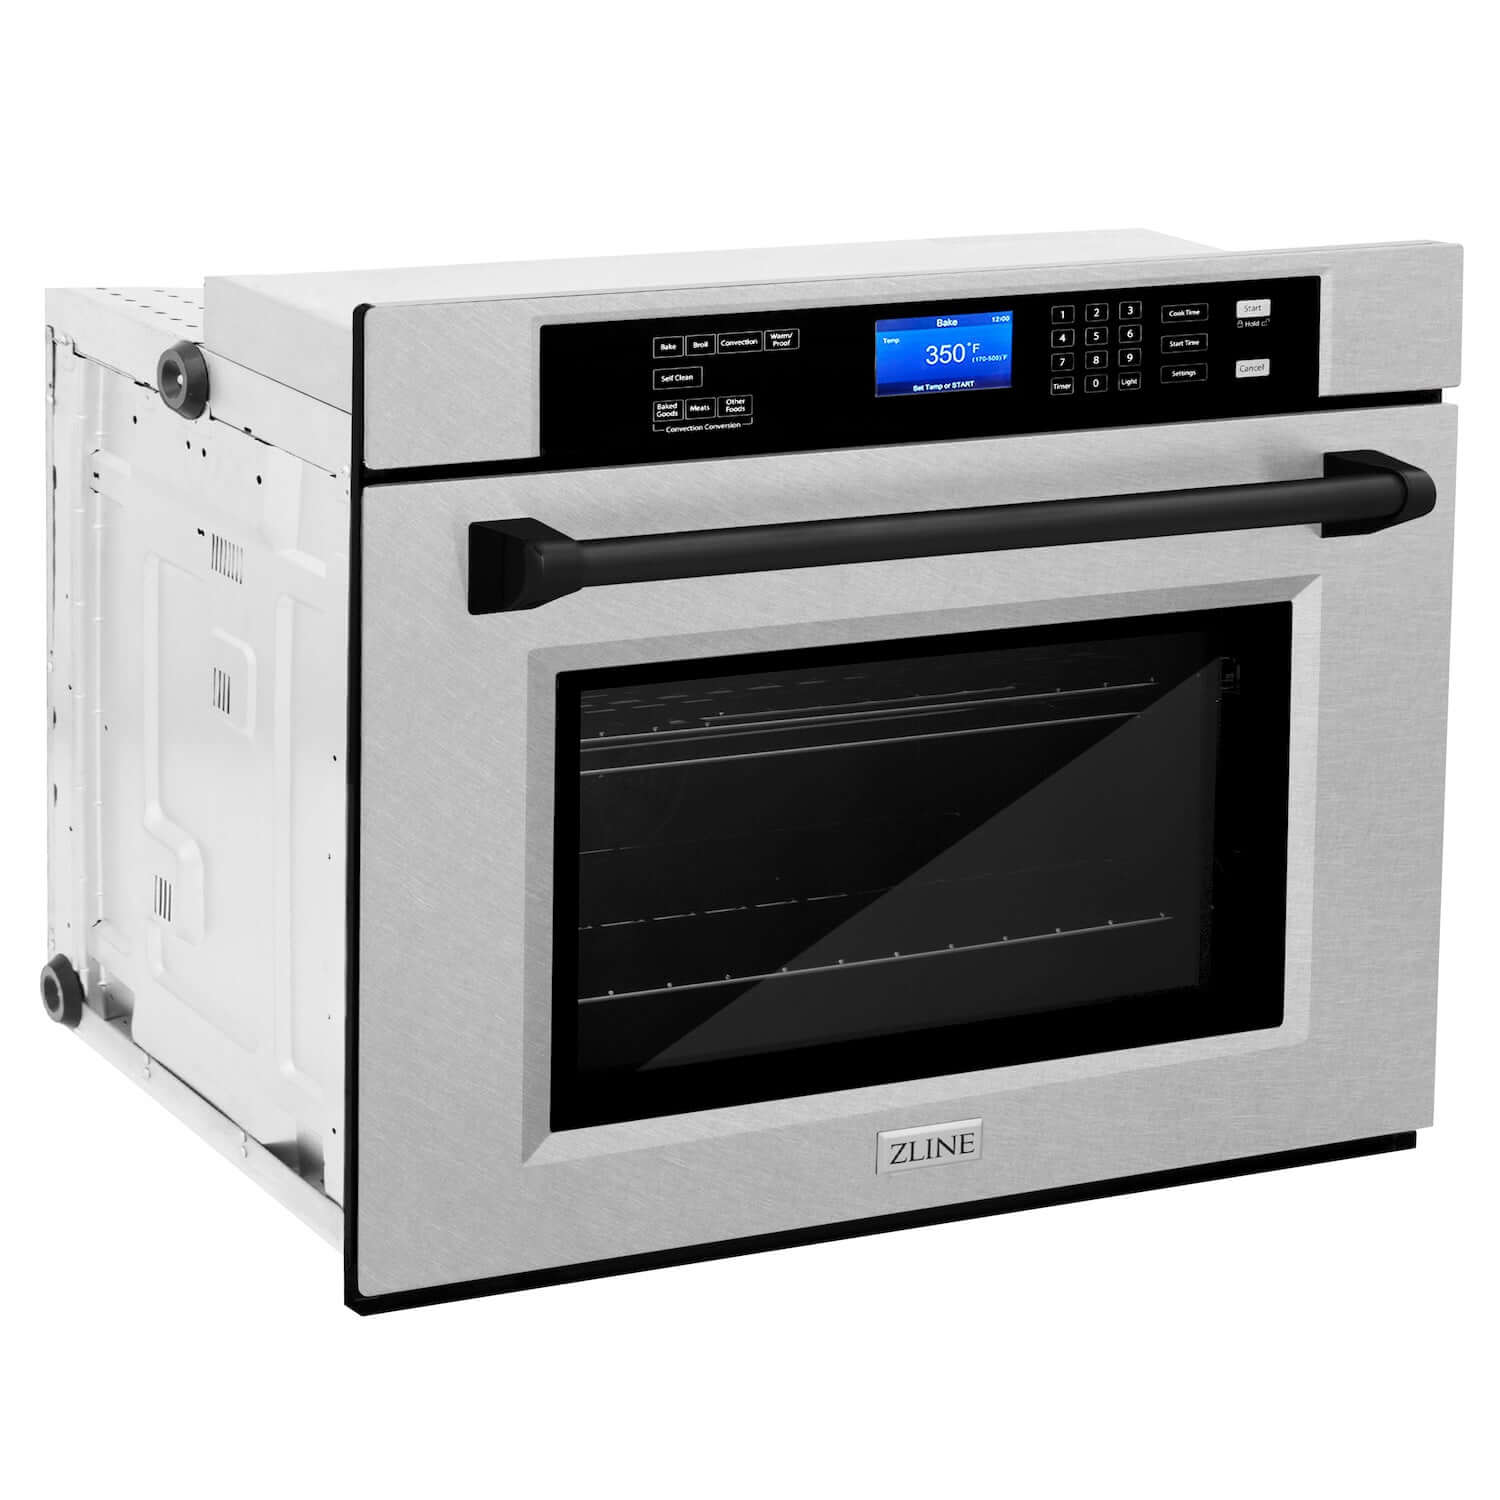 ZLINE Autograph Edition 30 in. Electric Single Wall Oven with Self Clean and True Convection in Fingerprint Resistant Stainless Steel and Matte Black Accents (AWSSZ-30-MB) side, closed.